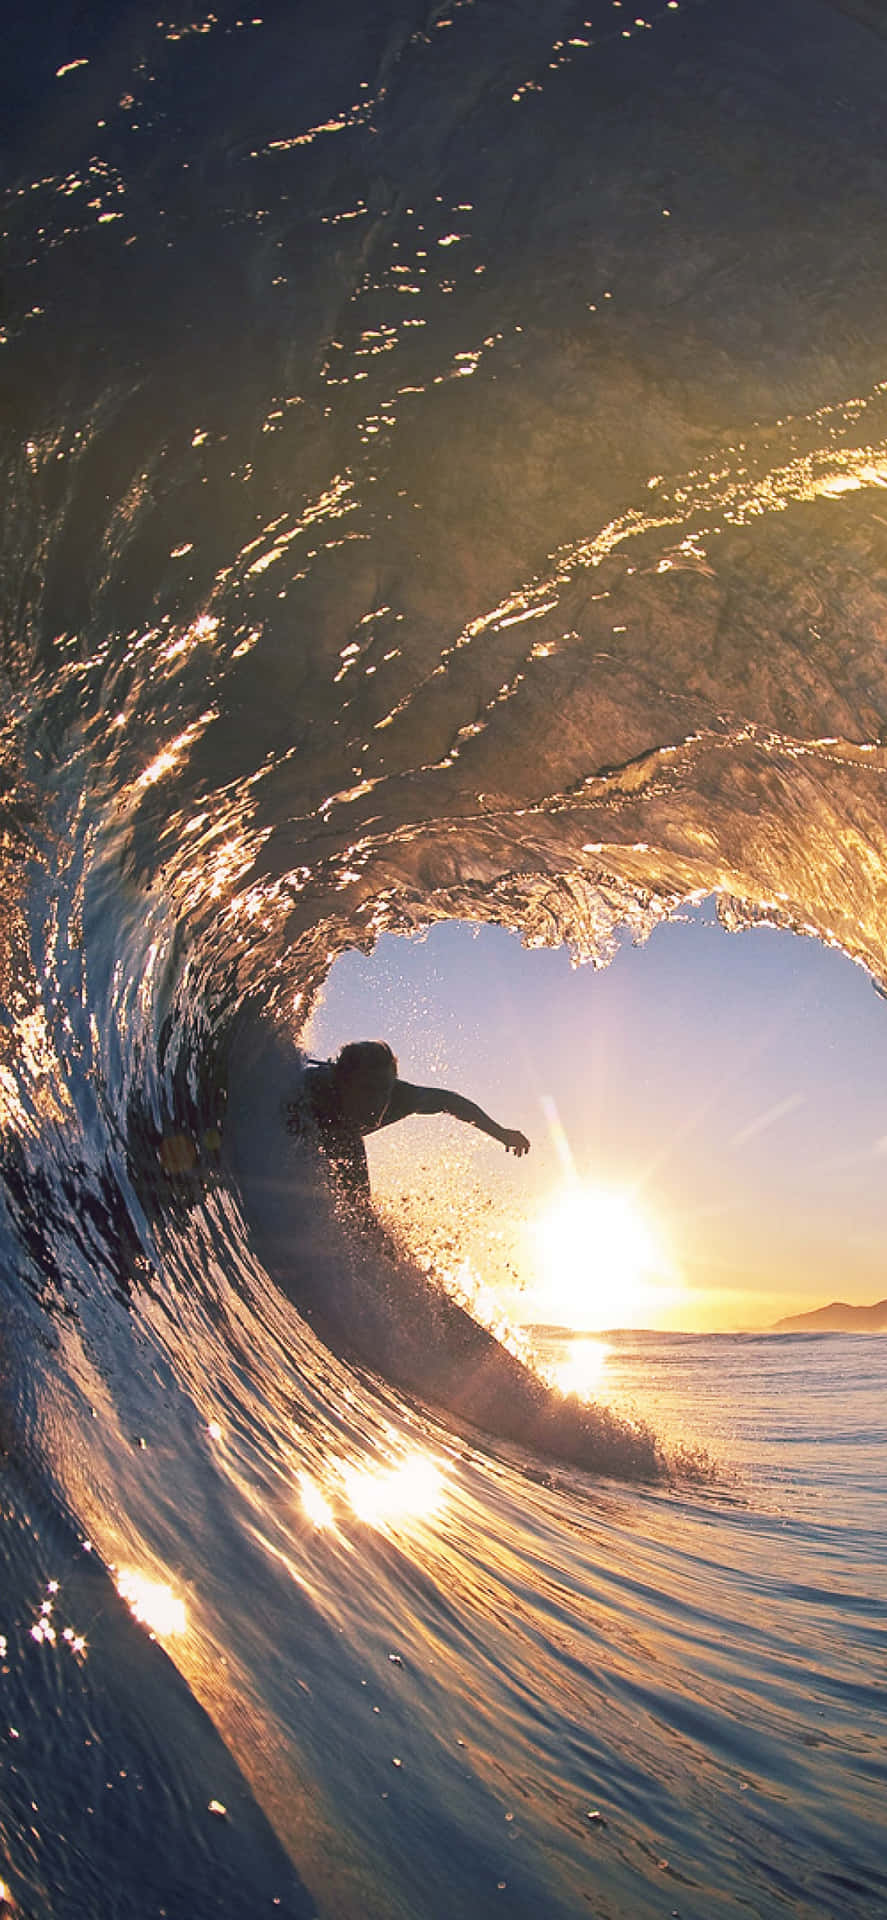 Catch a Wave and Capture the Moment with an iPhone Wallpaper